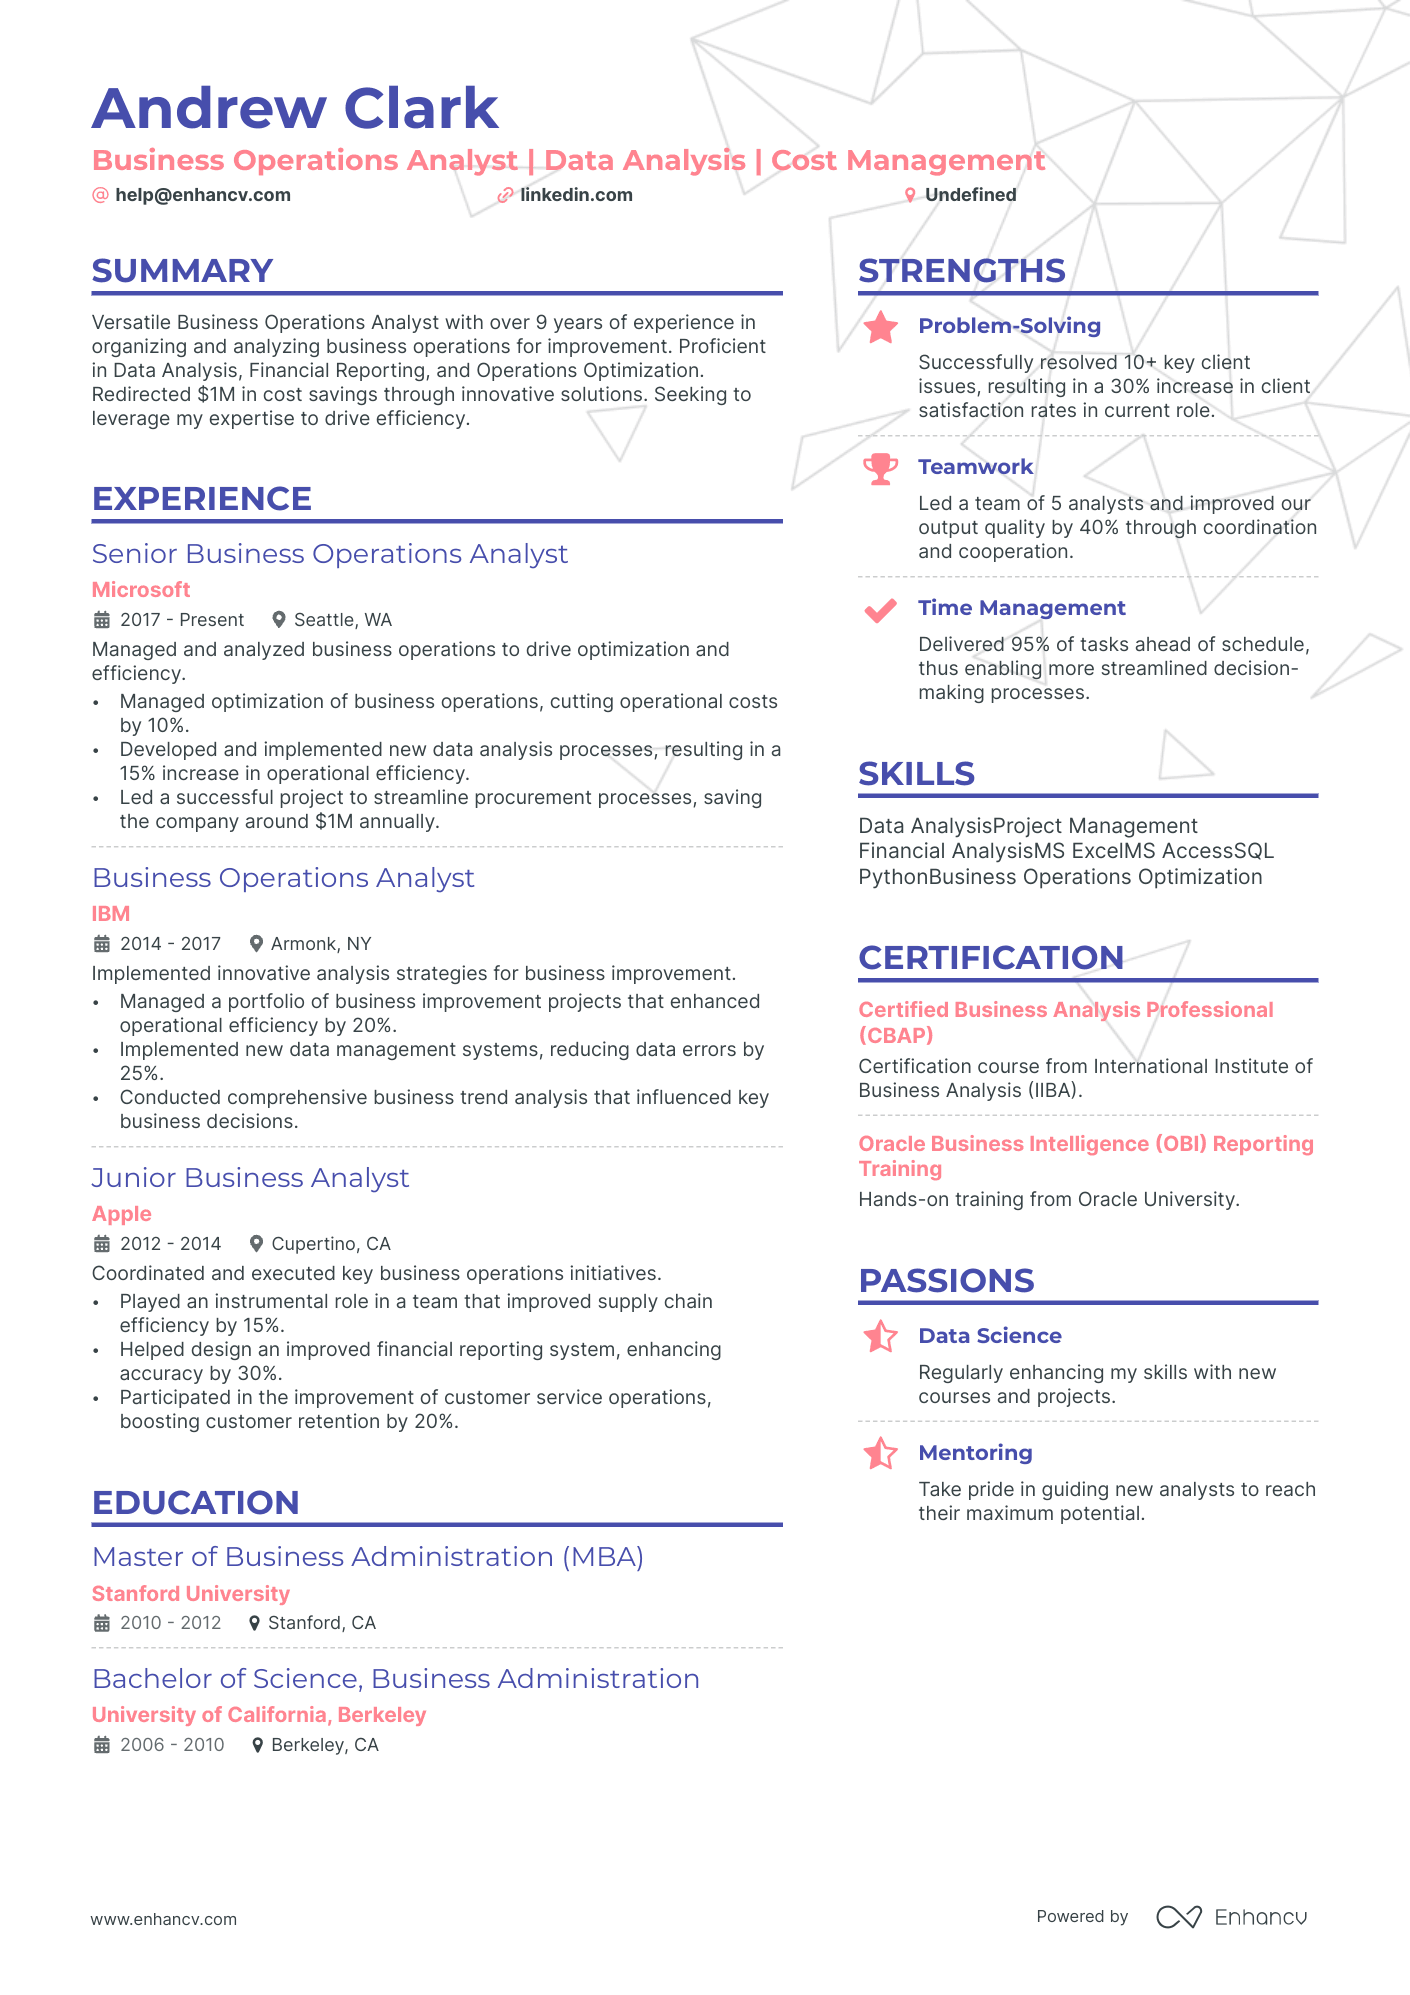 Business Operations Analyst resume example